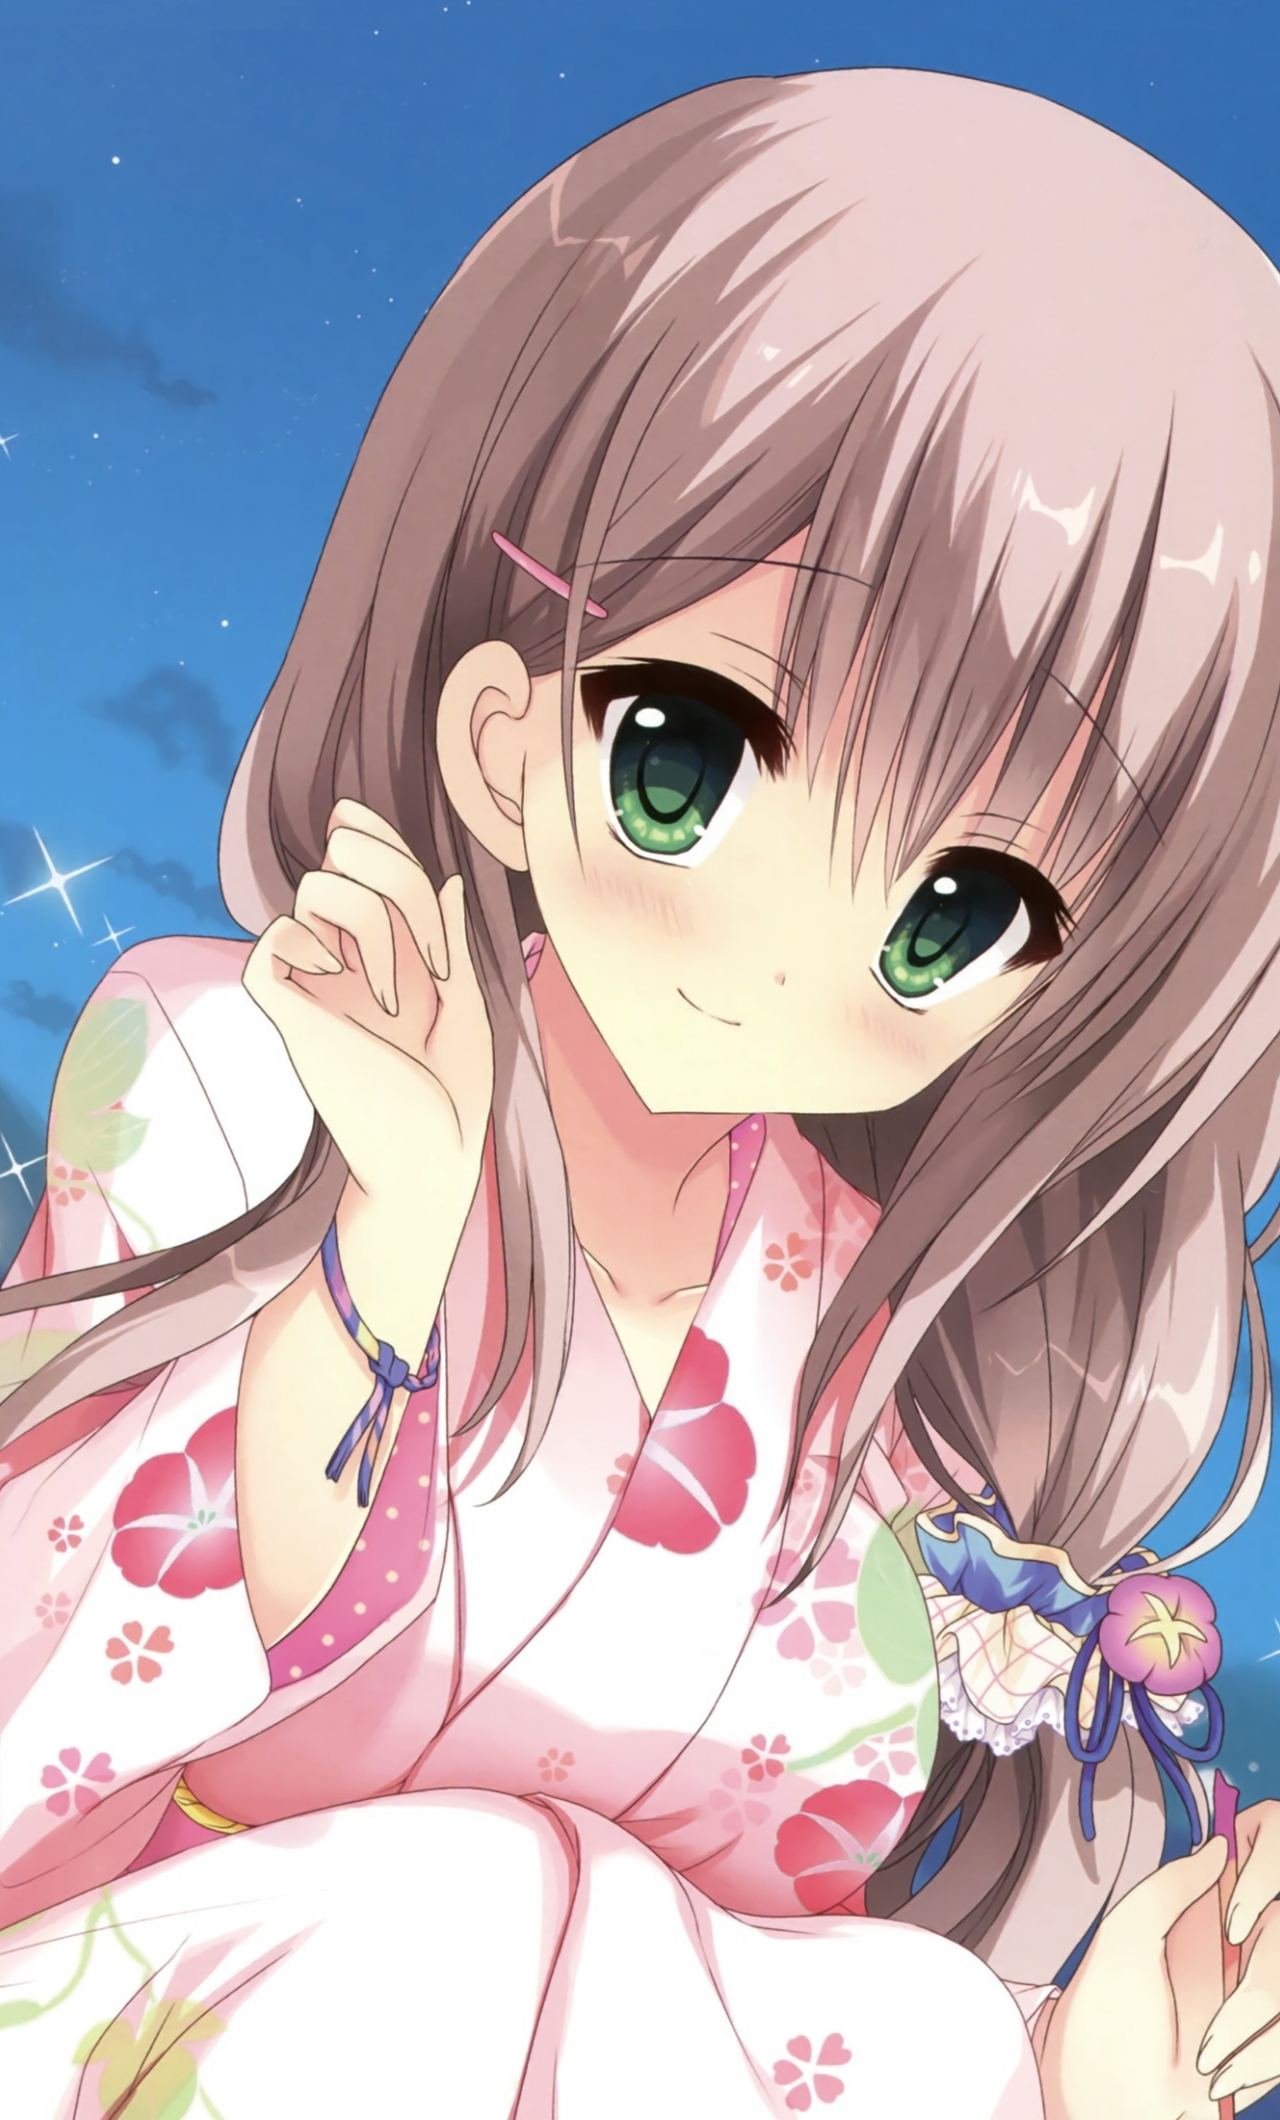 Download Wallpaper 1280x2120 Cute Anime Girl Outdoor Green Eyes Iphone 6 Plus 1280x2120 Hd 